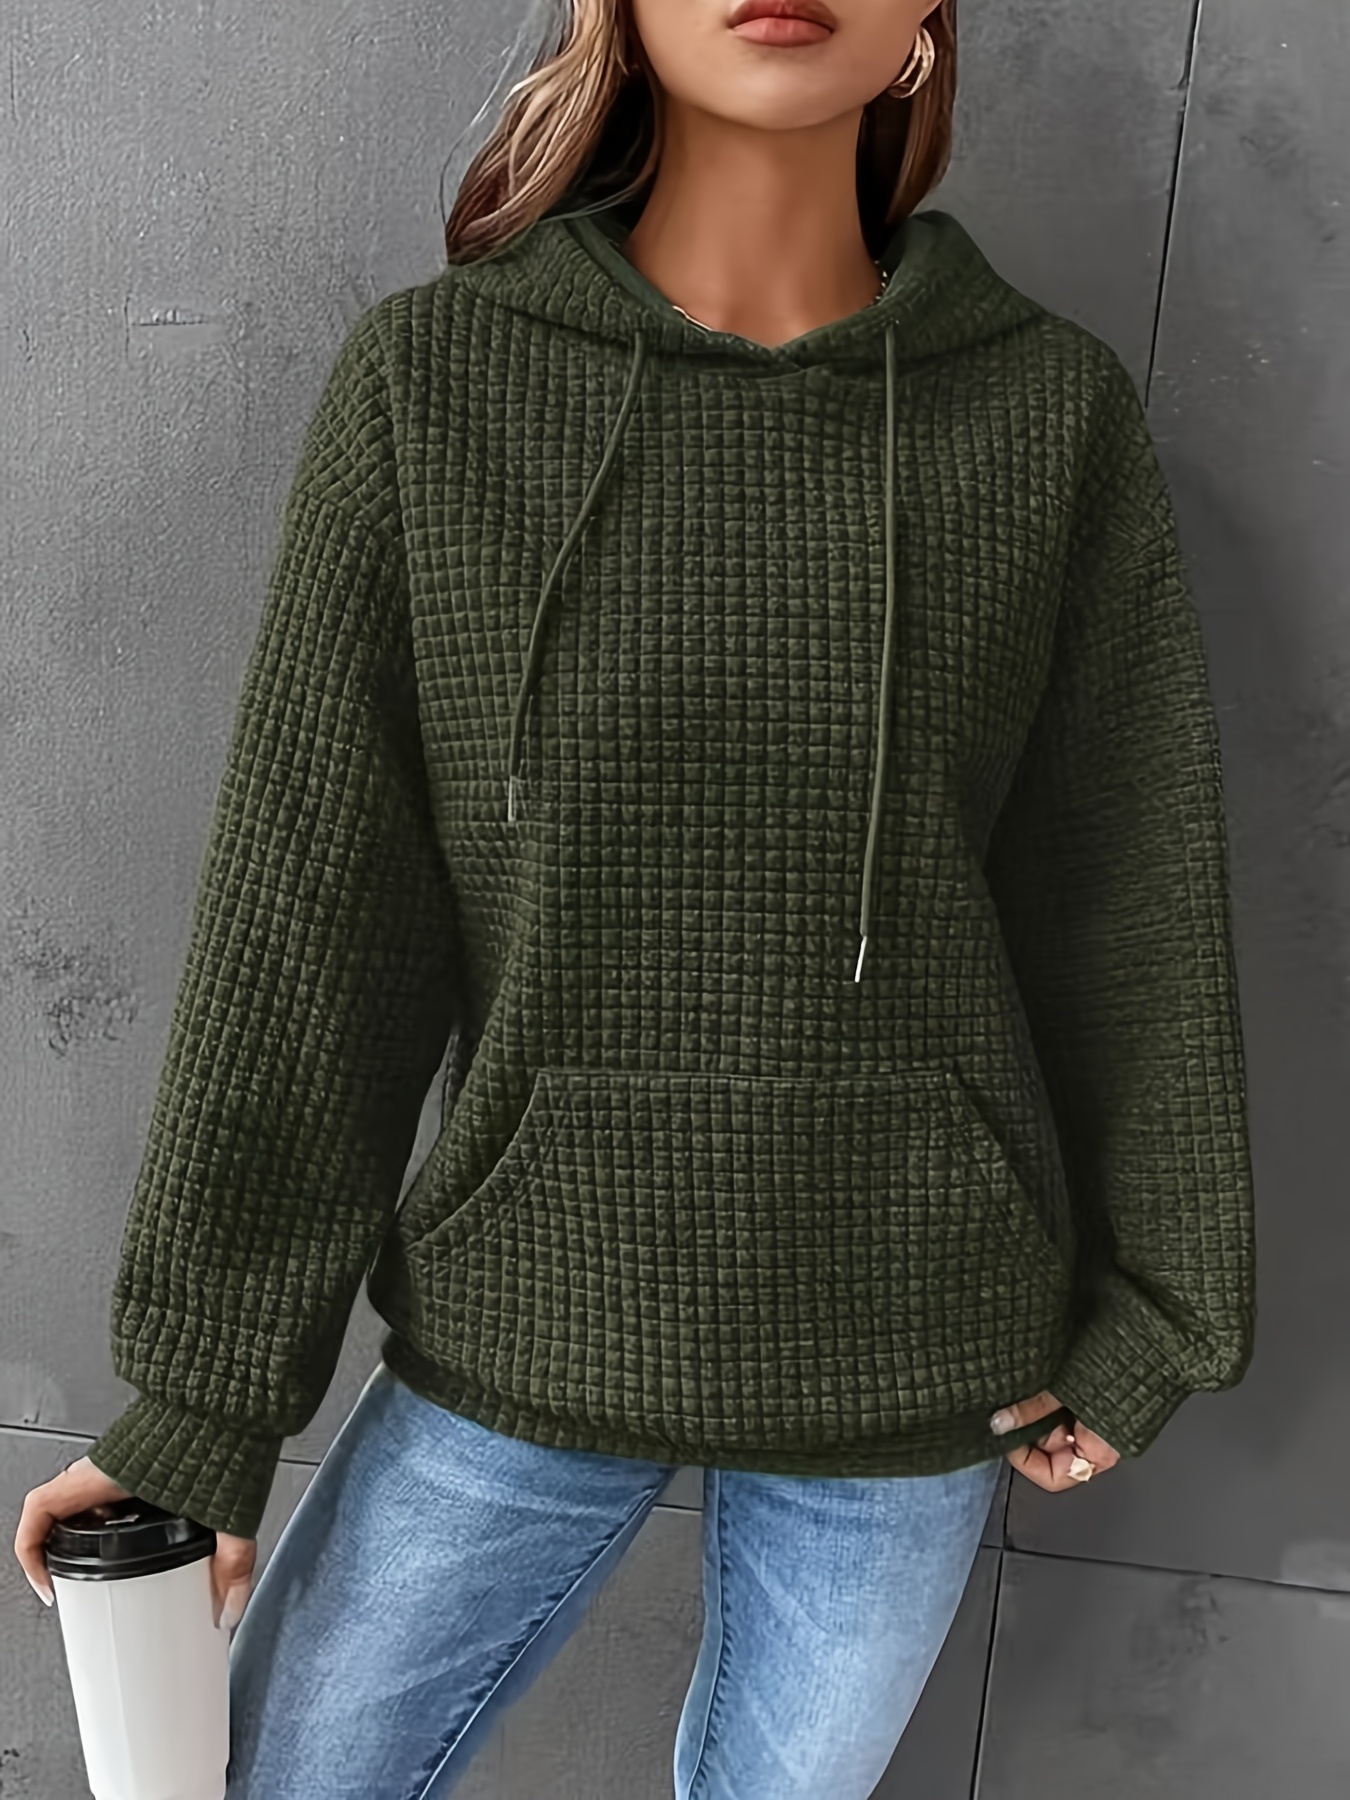 Oversized Waffle Knit  Womens Sweatshirts With Long Sleeves And Side  Slits Casual Pullover Top From Shangzhu, $18.33